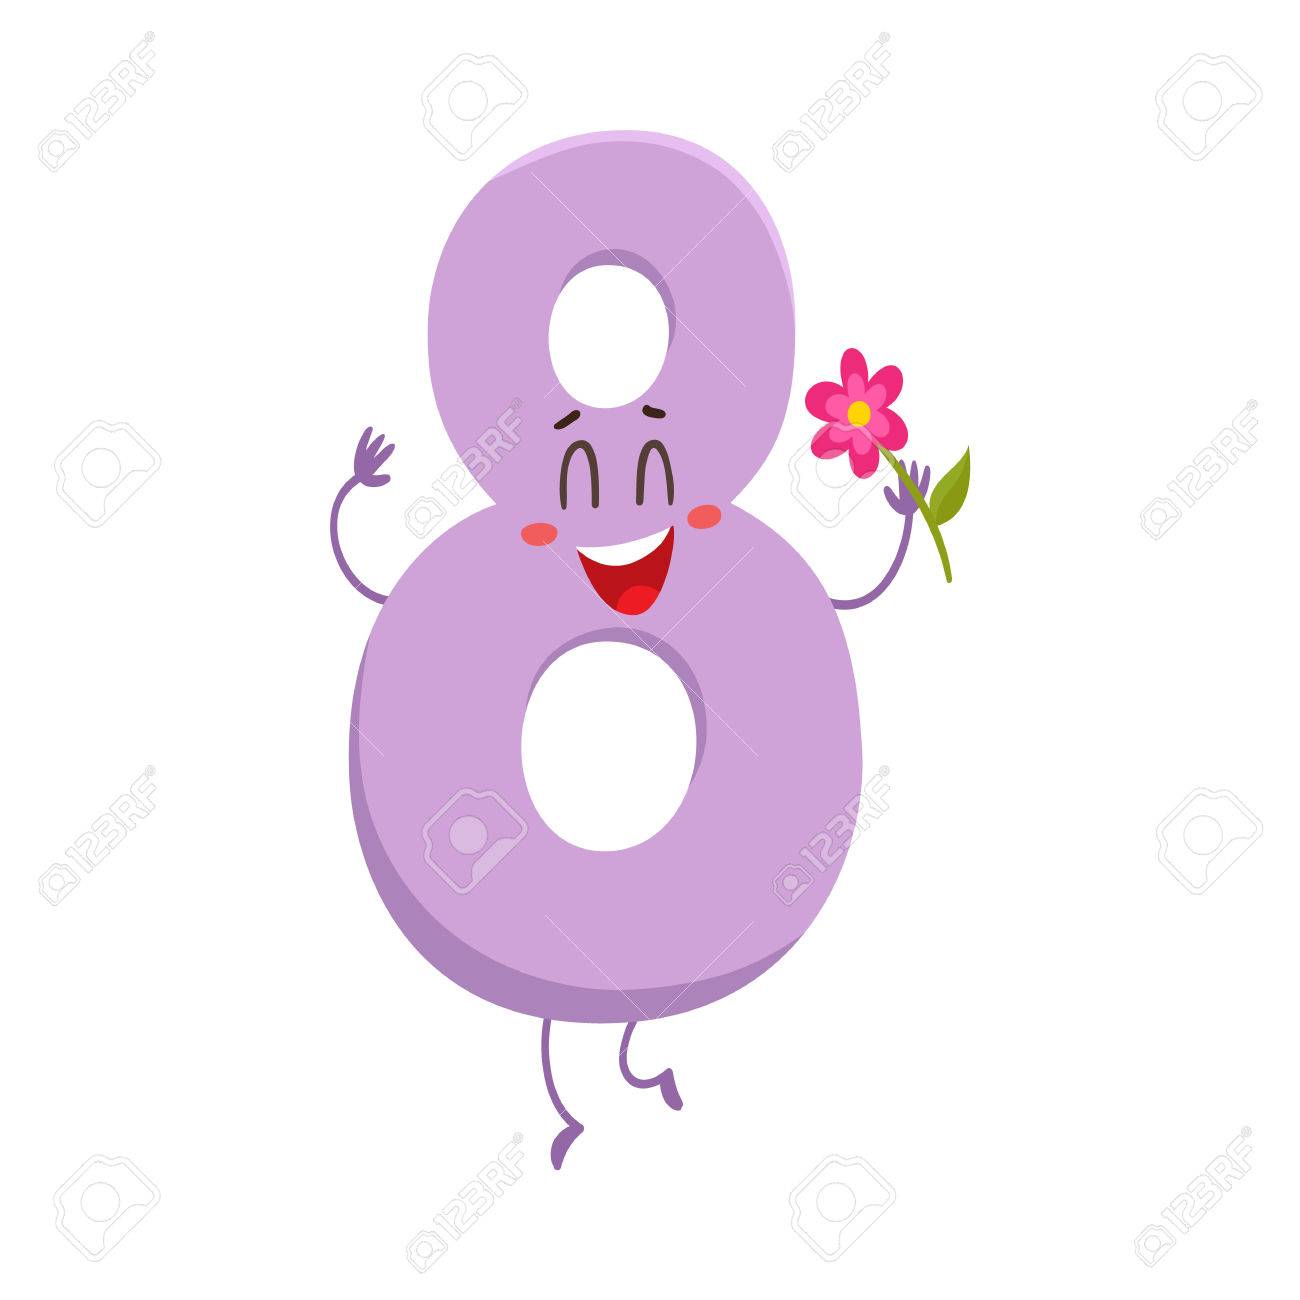 68839693-cute-and-funny-colorful-8-number-characters-cartoon-vector-illustration-isolated-on-white-background.jpg